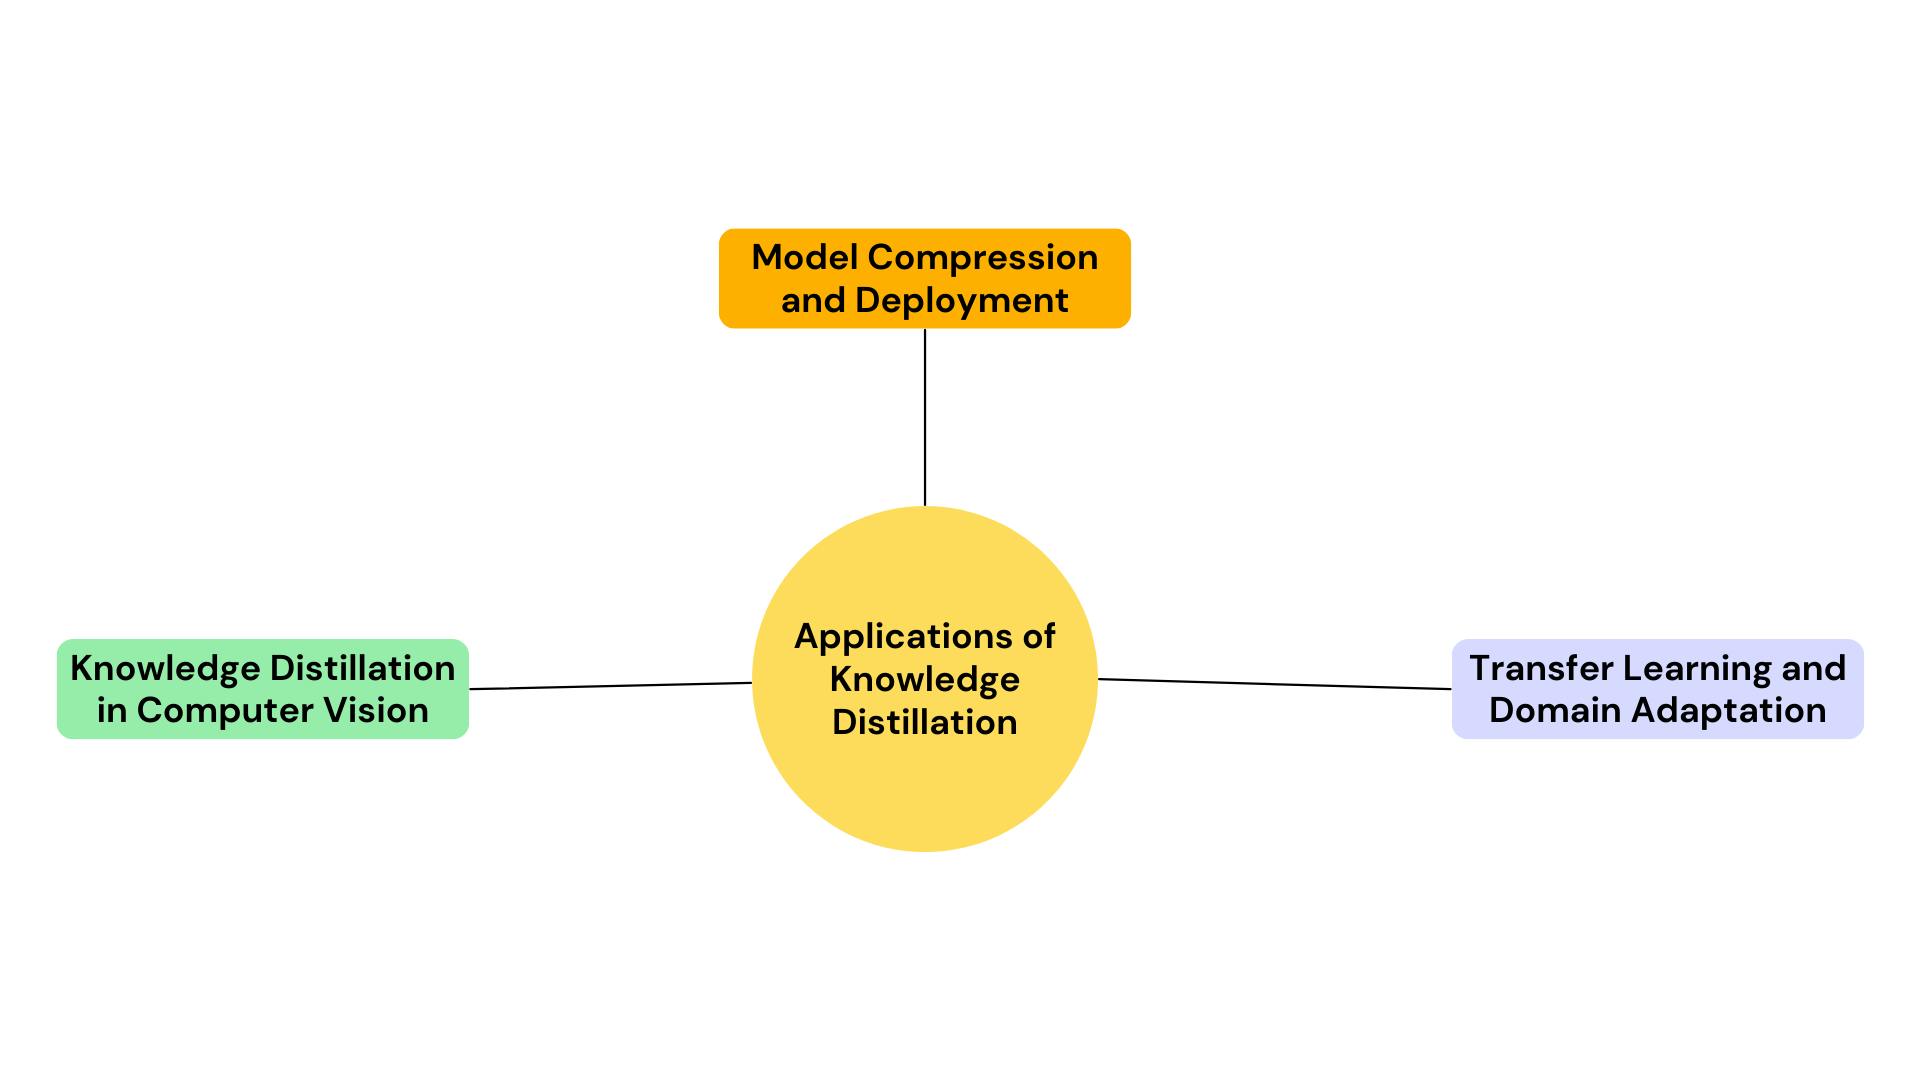 Applications of Knowledge Distillation